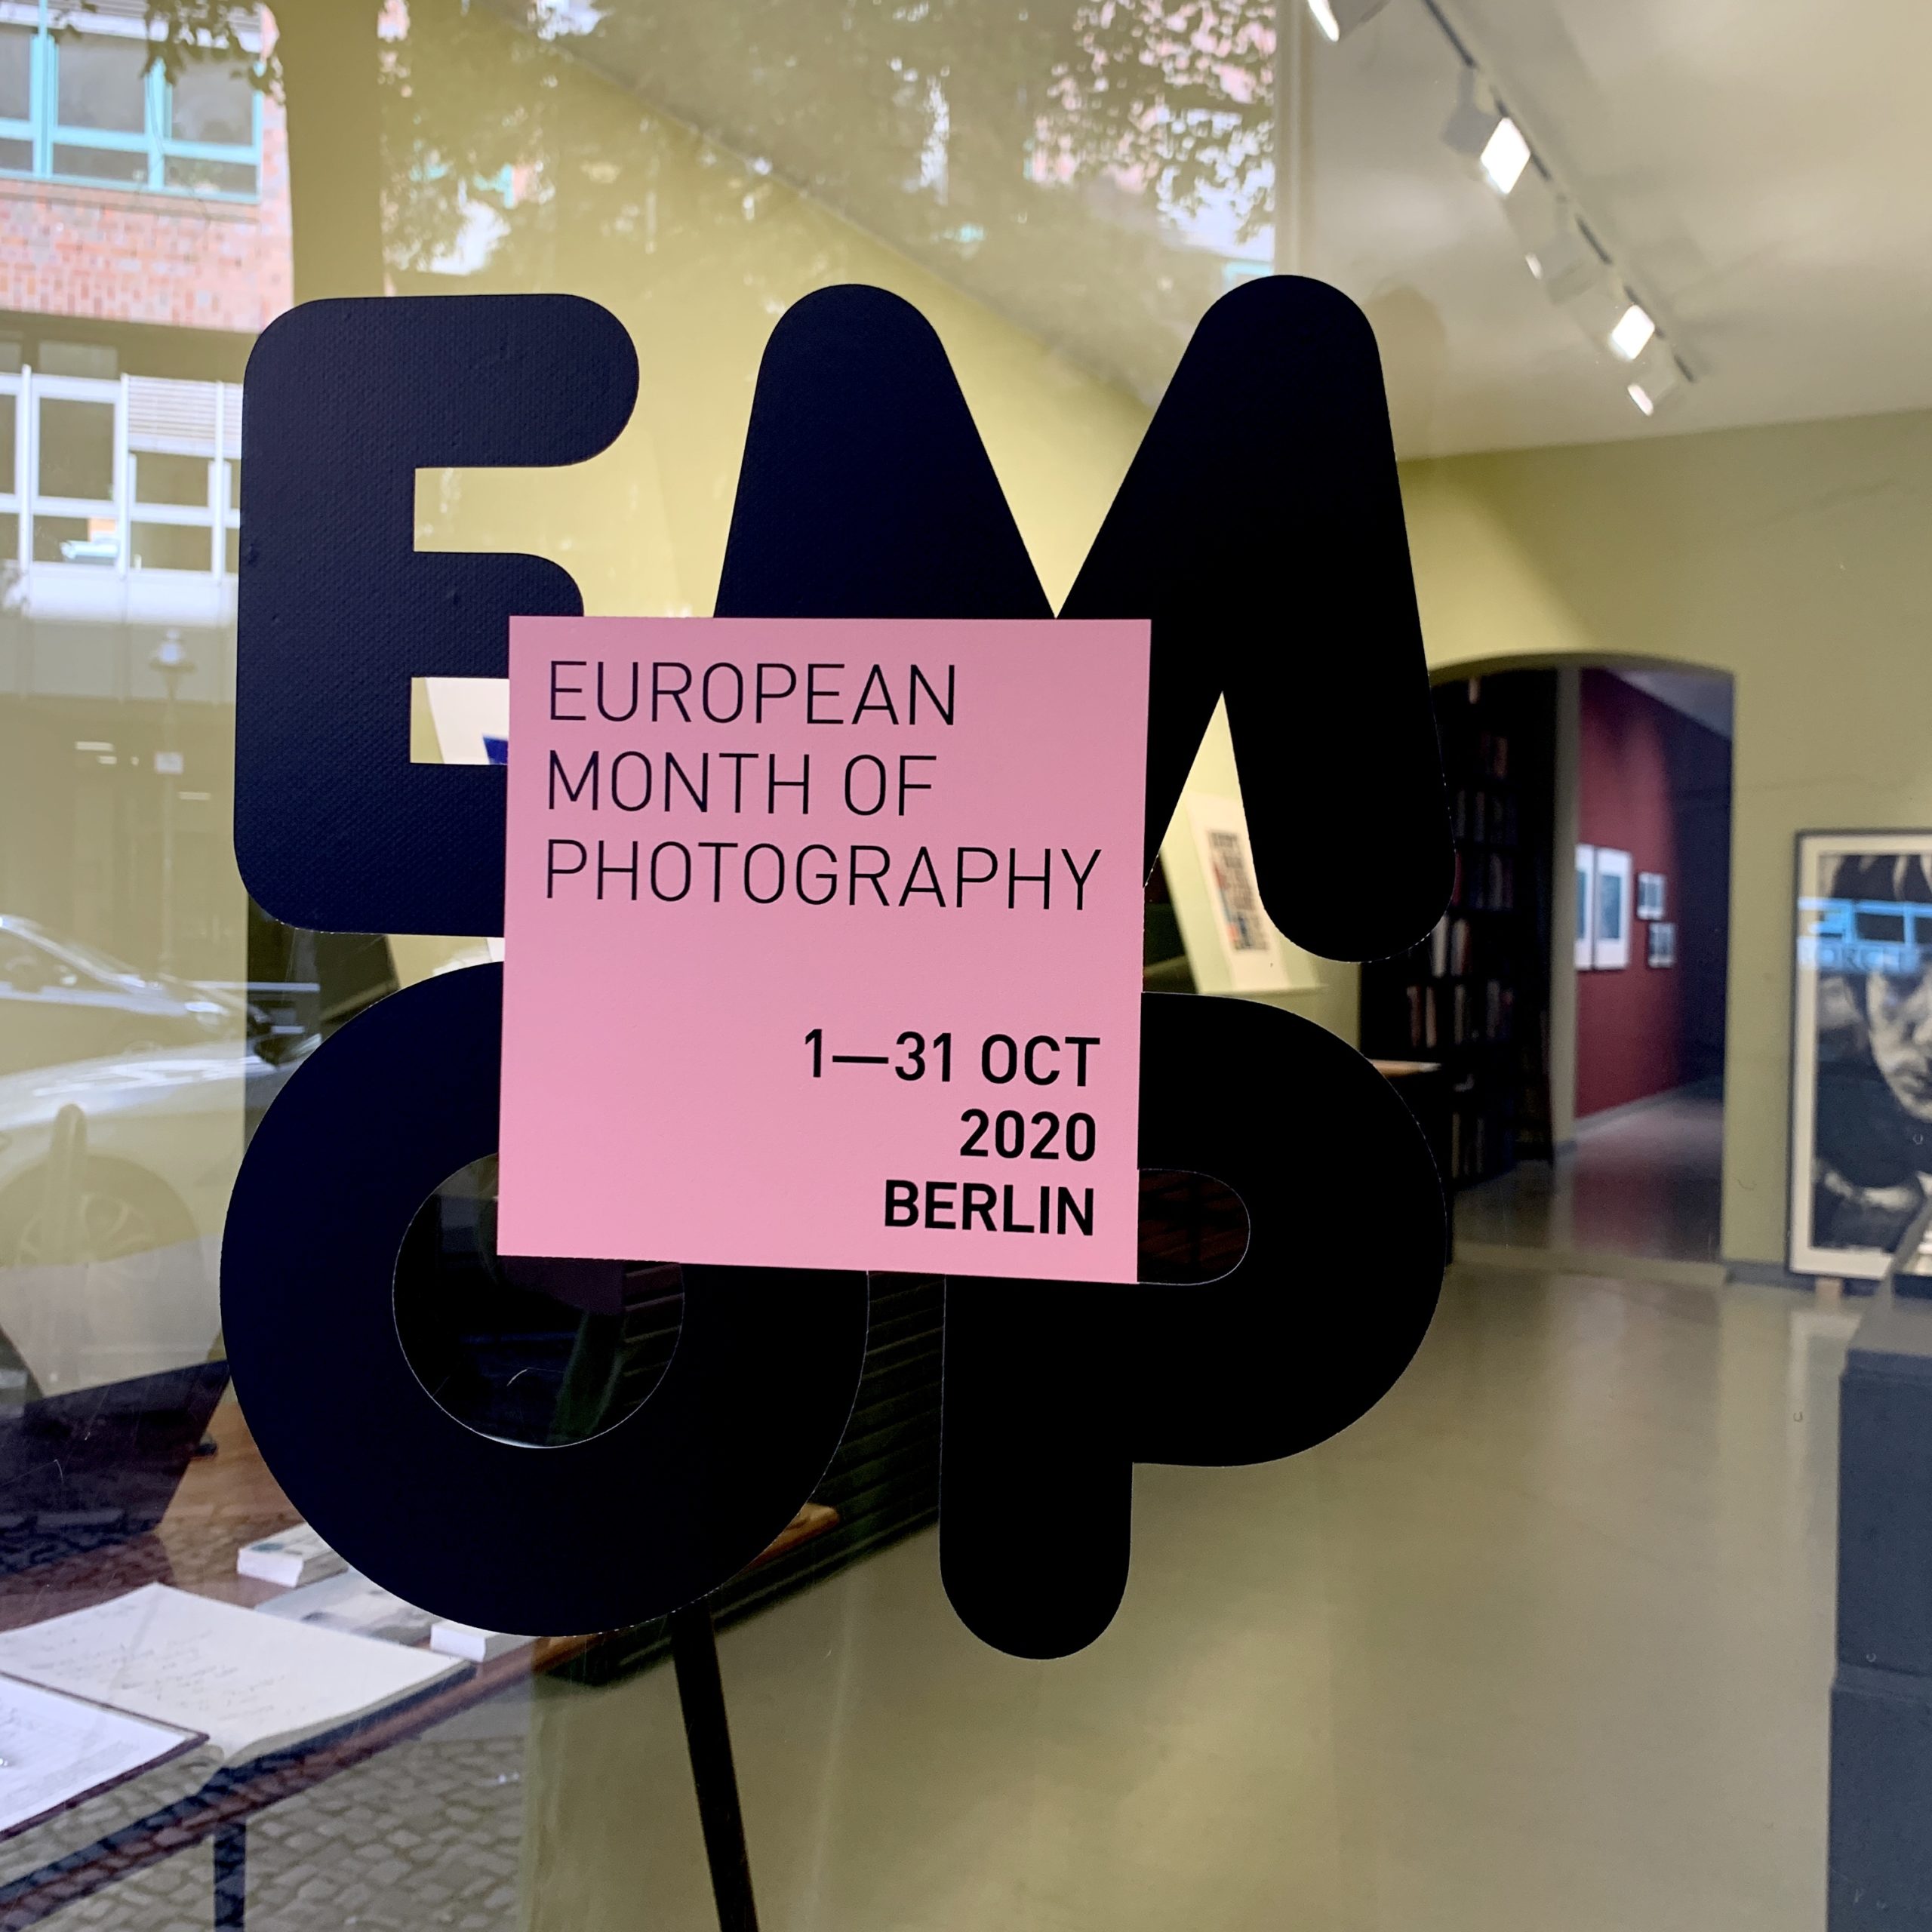 BORCH Gallery is participating in EMOP – European Month of Photography 2020